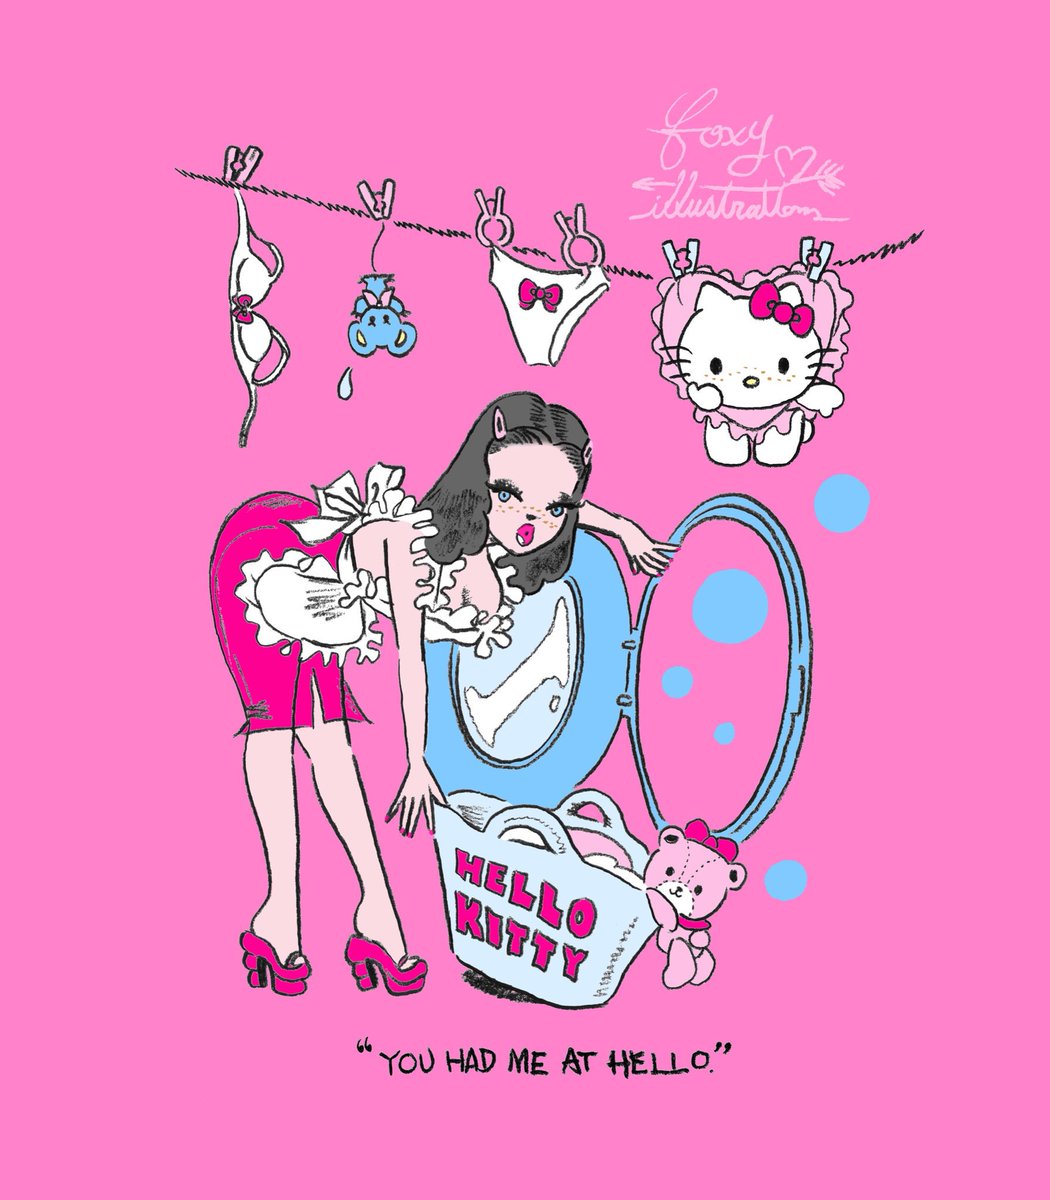 Foxy Illustrations Foxy Hello Kitty You Had Me At Hello Heads Up Kitty Girl I M Proud To Announce My First Official Collaboration With Hello Kitty Limited Pop Up Store Coming